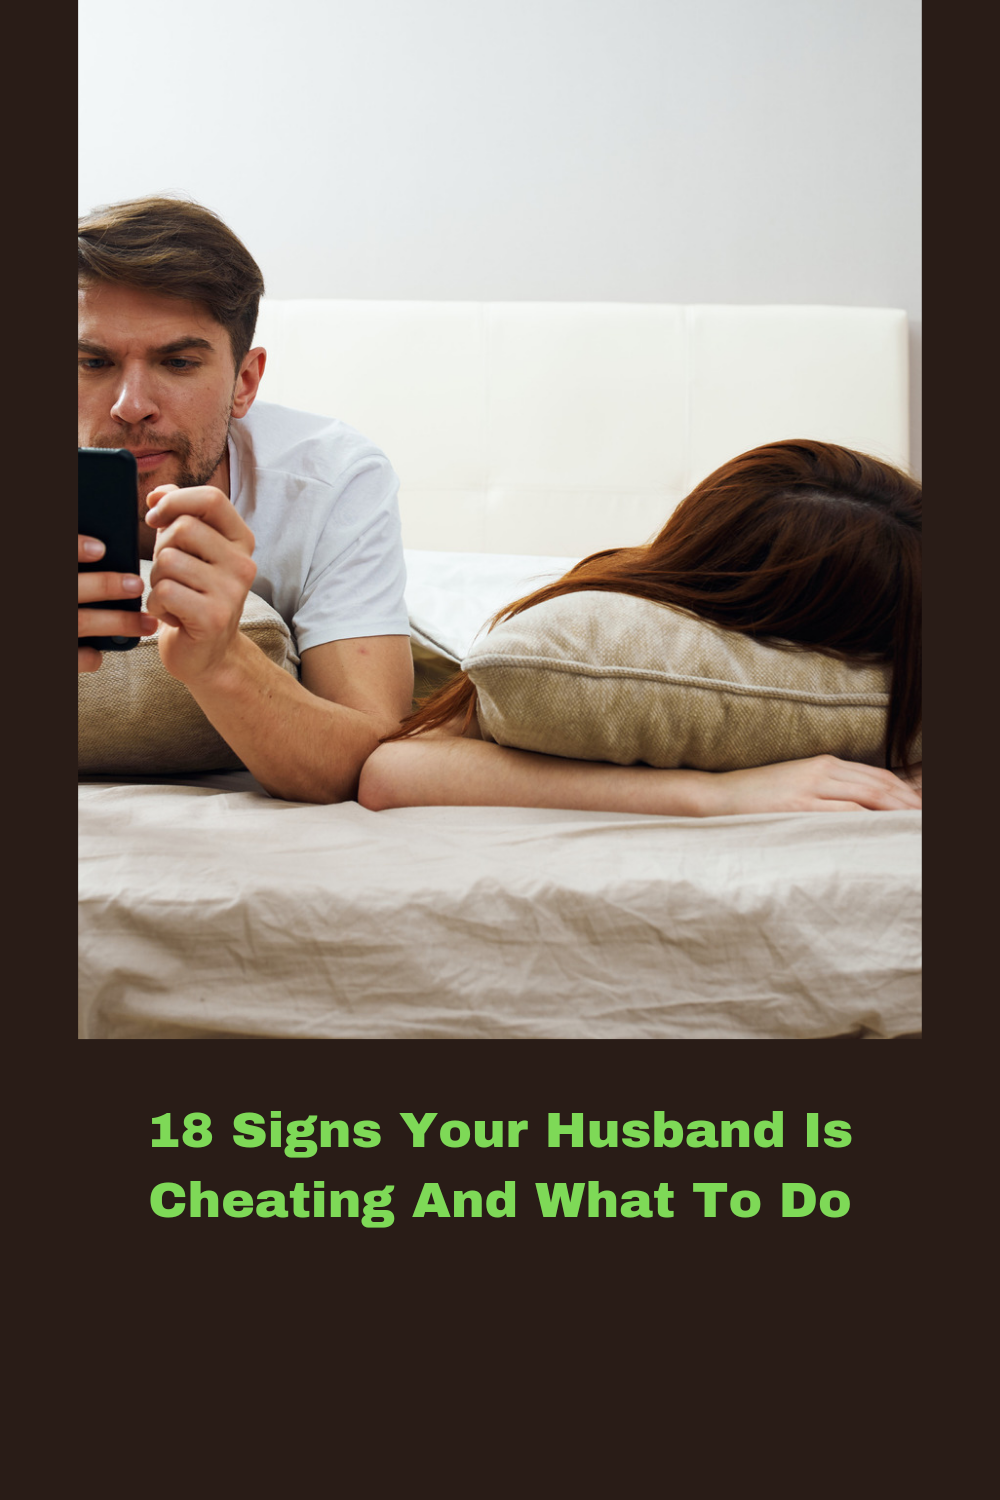 18 Signs Your Husband Is Cheating And What To Do